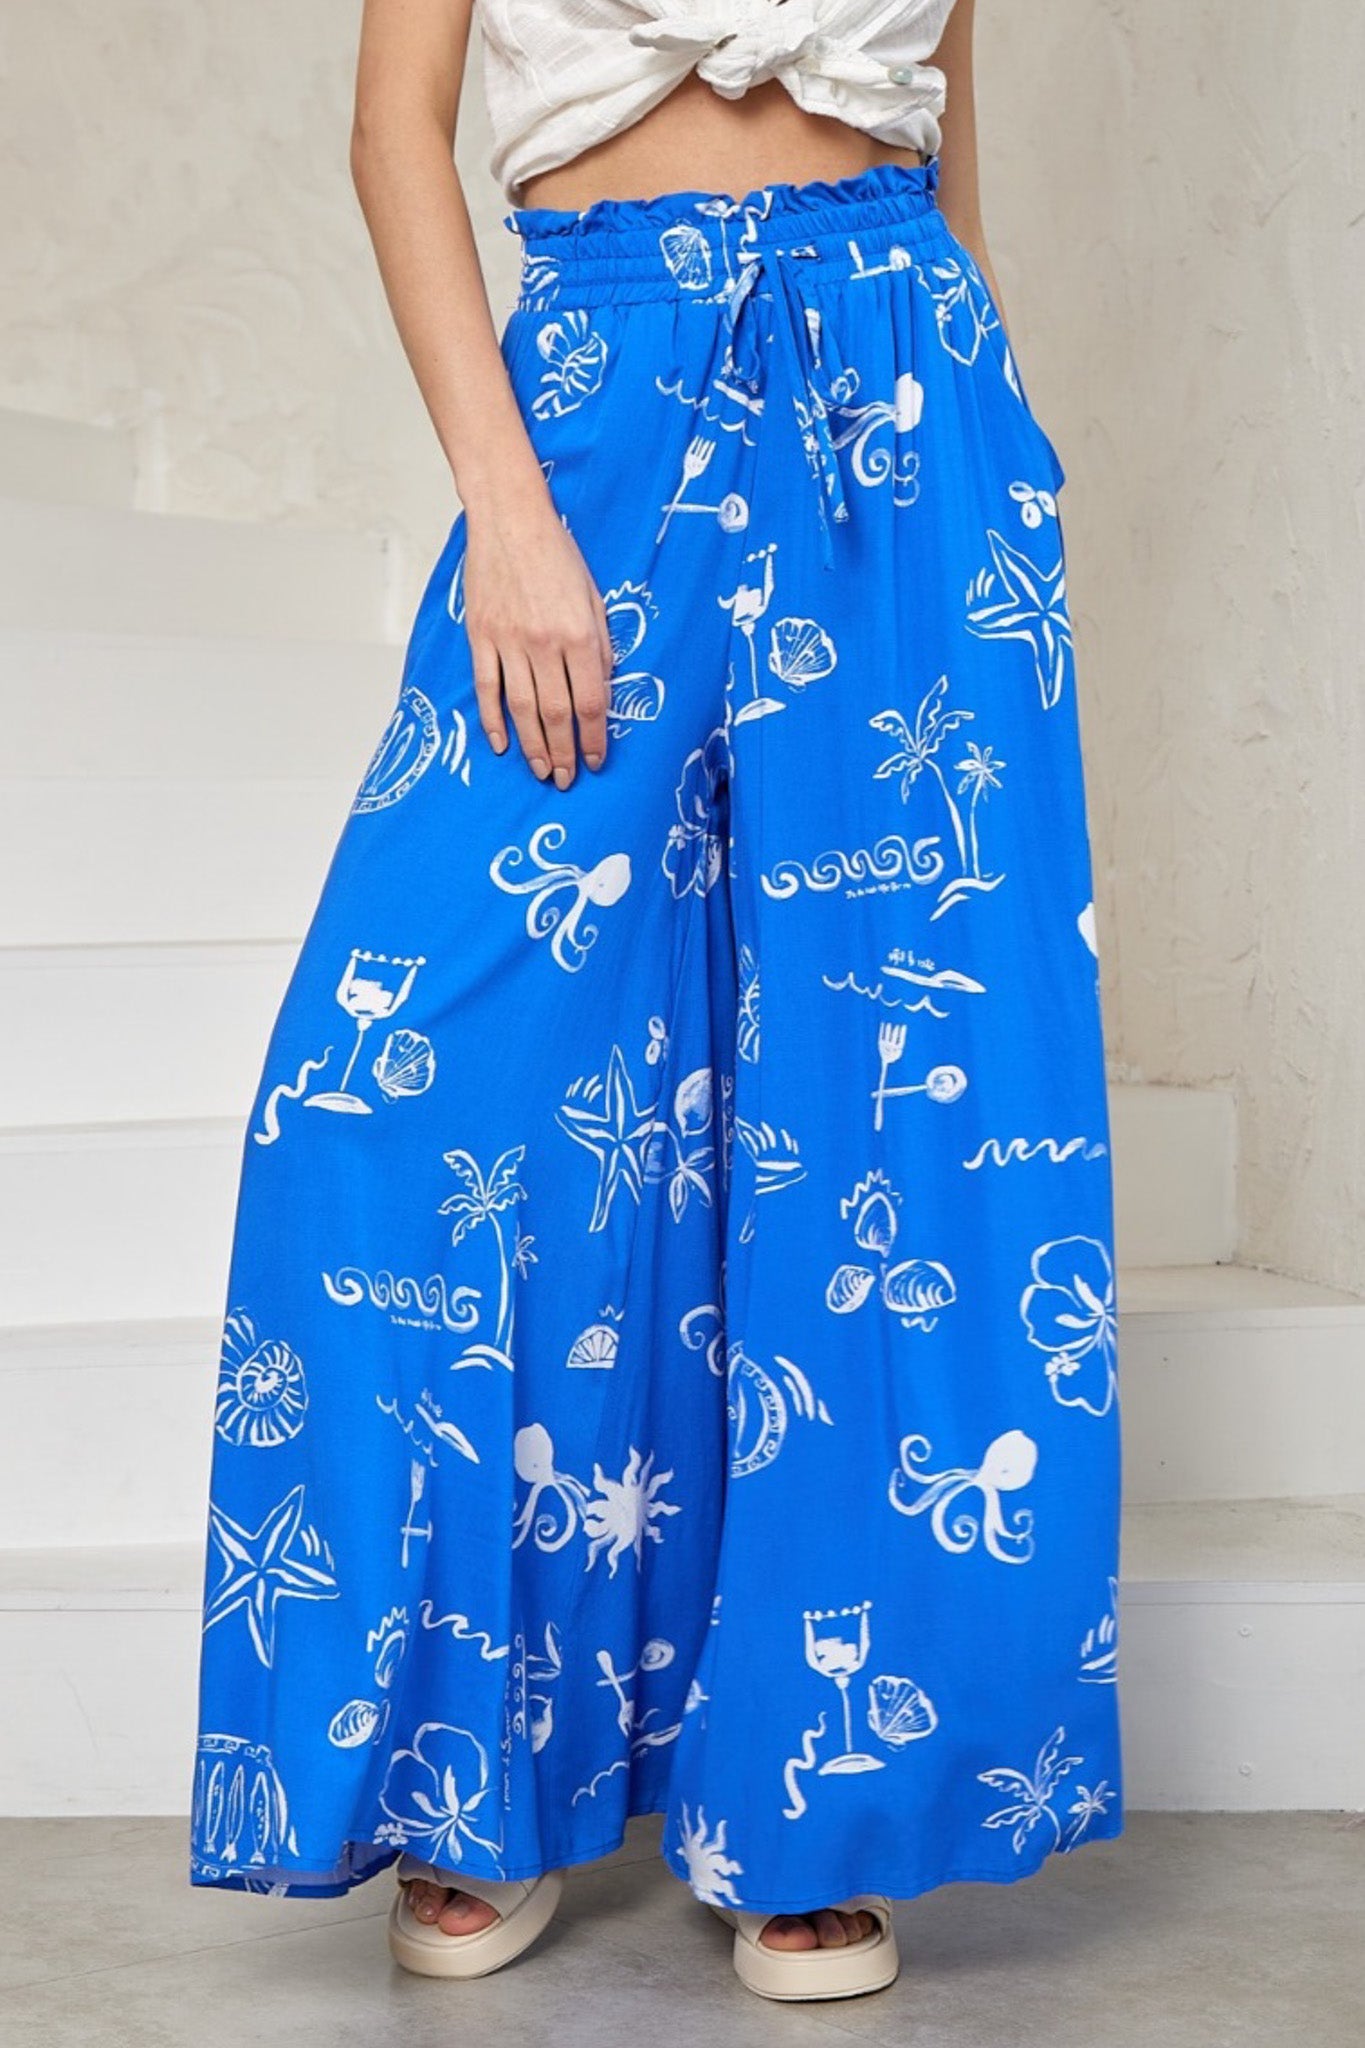 Umiko Pants - Paper Bag High Waisted Wide Leg Pants with Graphic Print